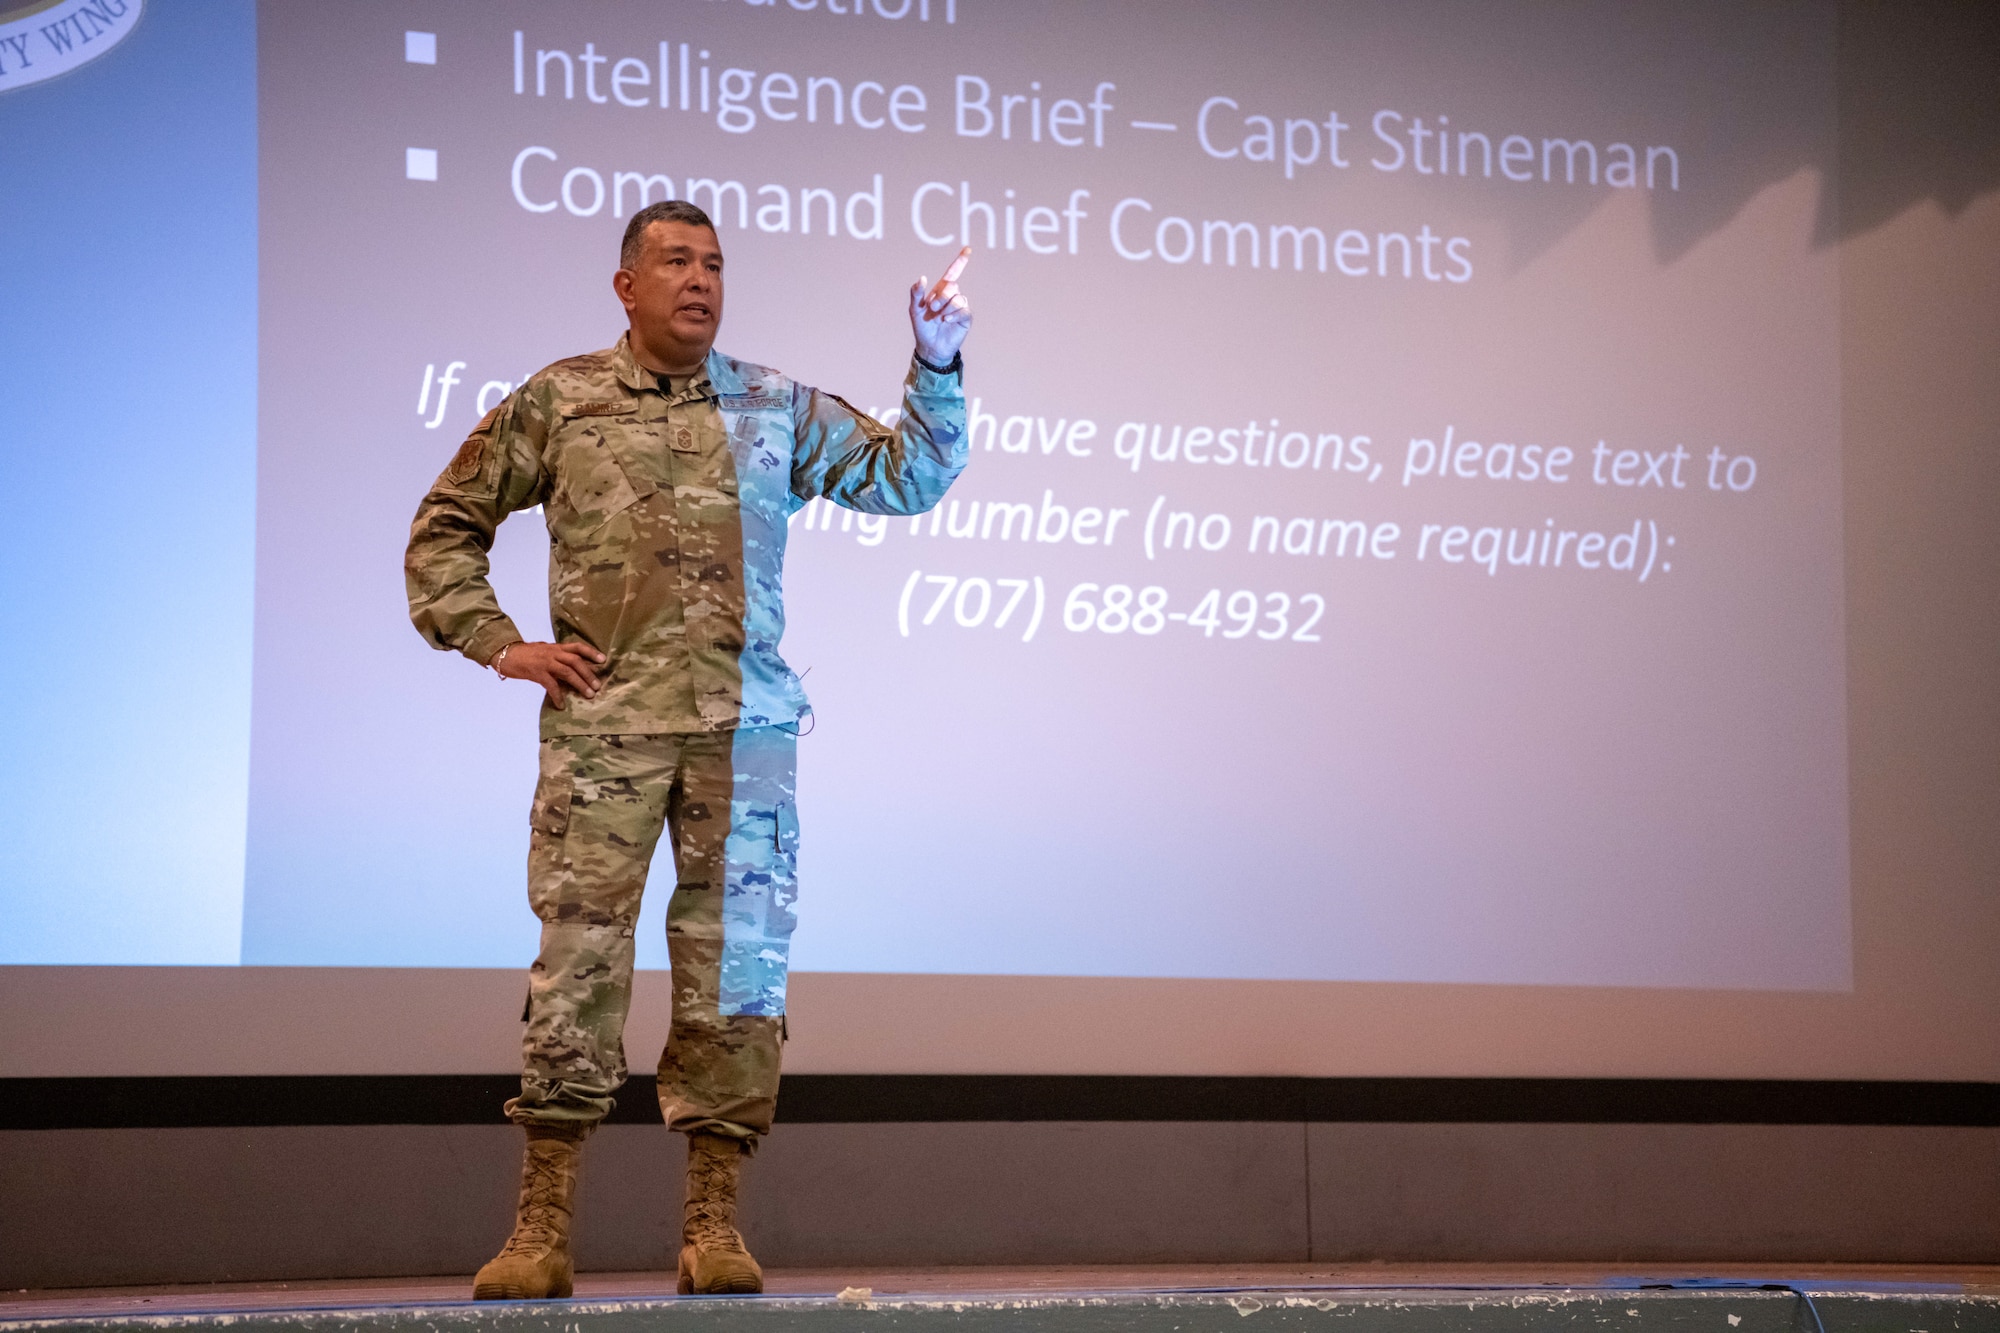 Airmen of the 349th Air Mobility Wing attend an enlisted call at Travis Air Force Base, California on June 3-4, 2023. The event allowed for communication from senior enlisted leadership including messages regarding retention, recruitment, security, and mental health.